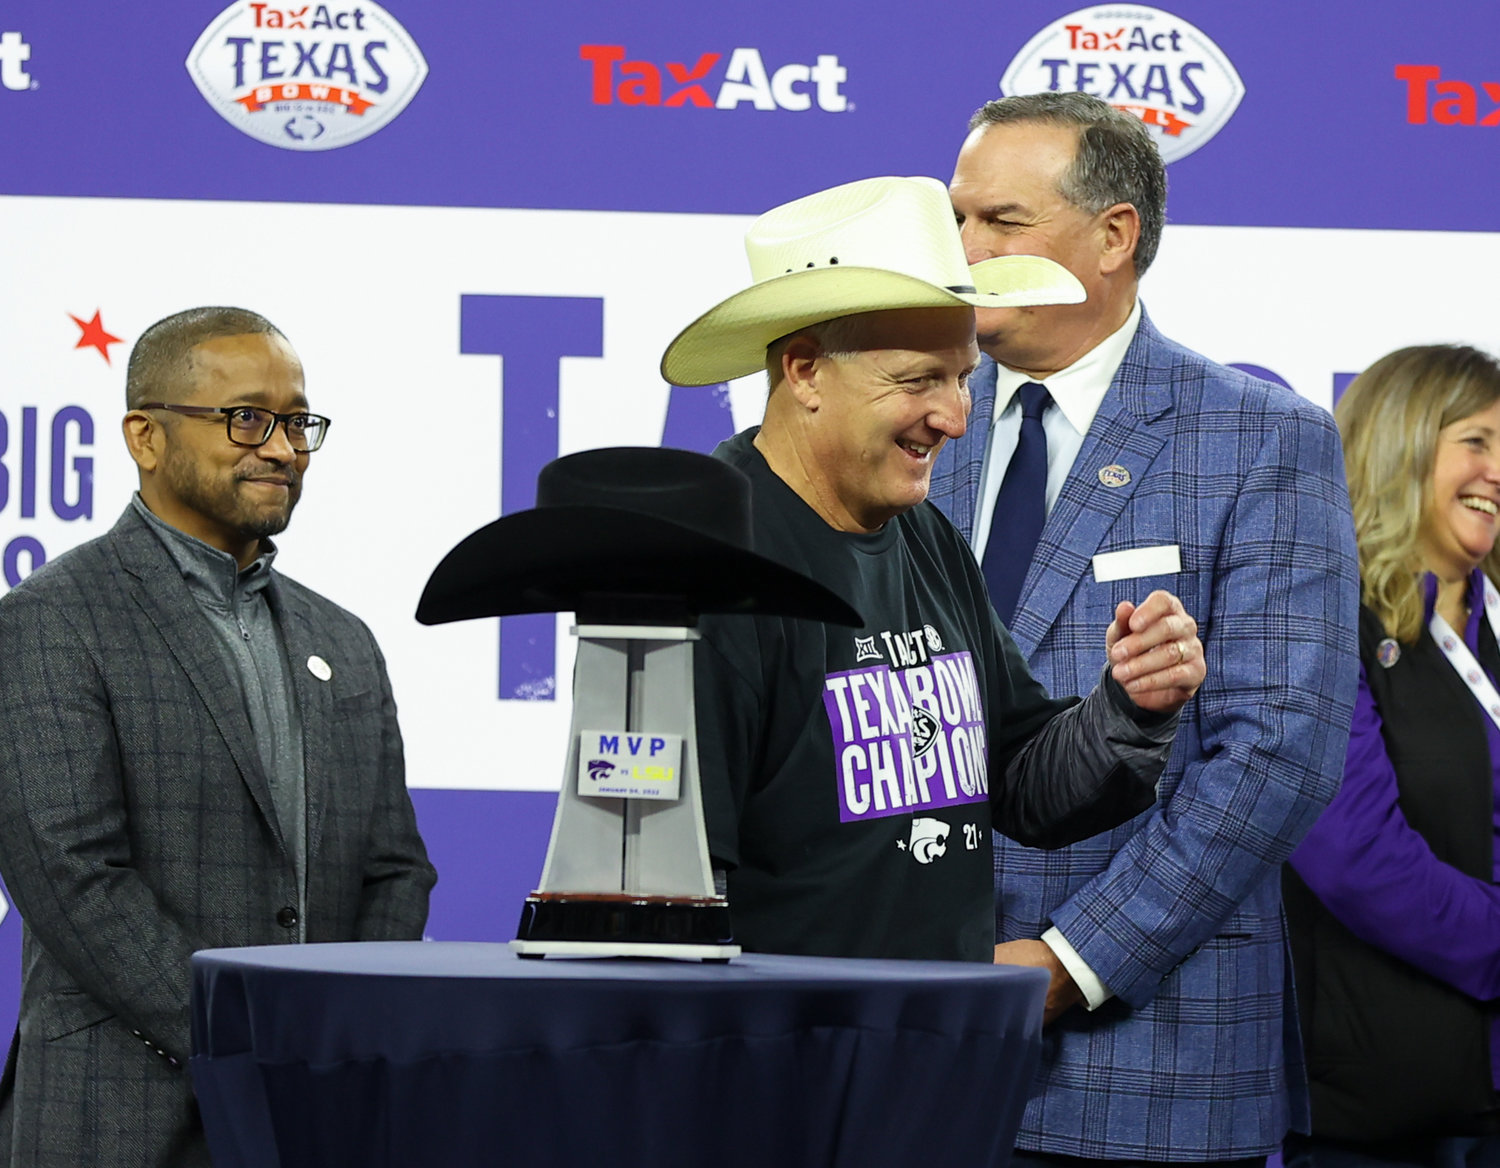 Kansas State Wildcats head coach Chris Klieman dons a cowboy hat following a 42-20 win over LSU in the TaxAct Texas Bowl on Jan. 4, 2022 in Houston, Texas.